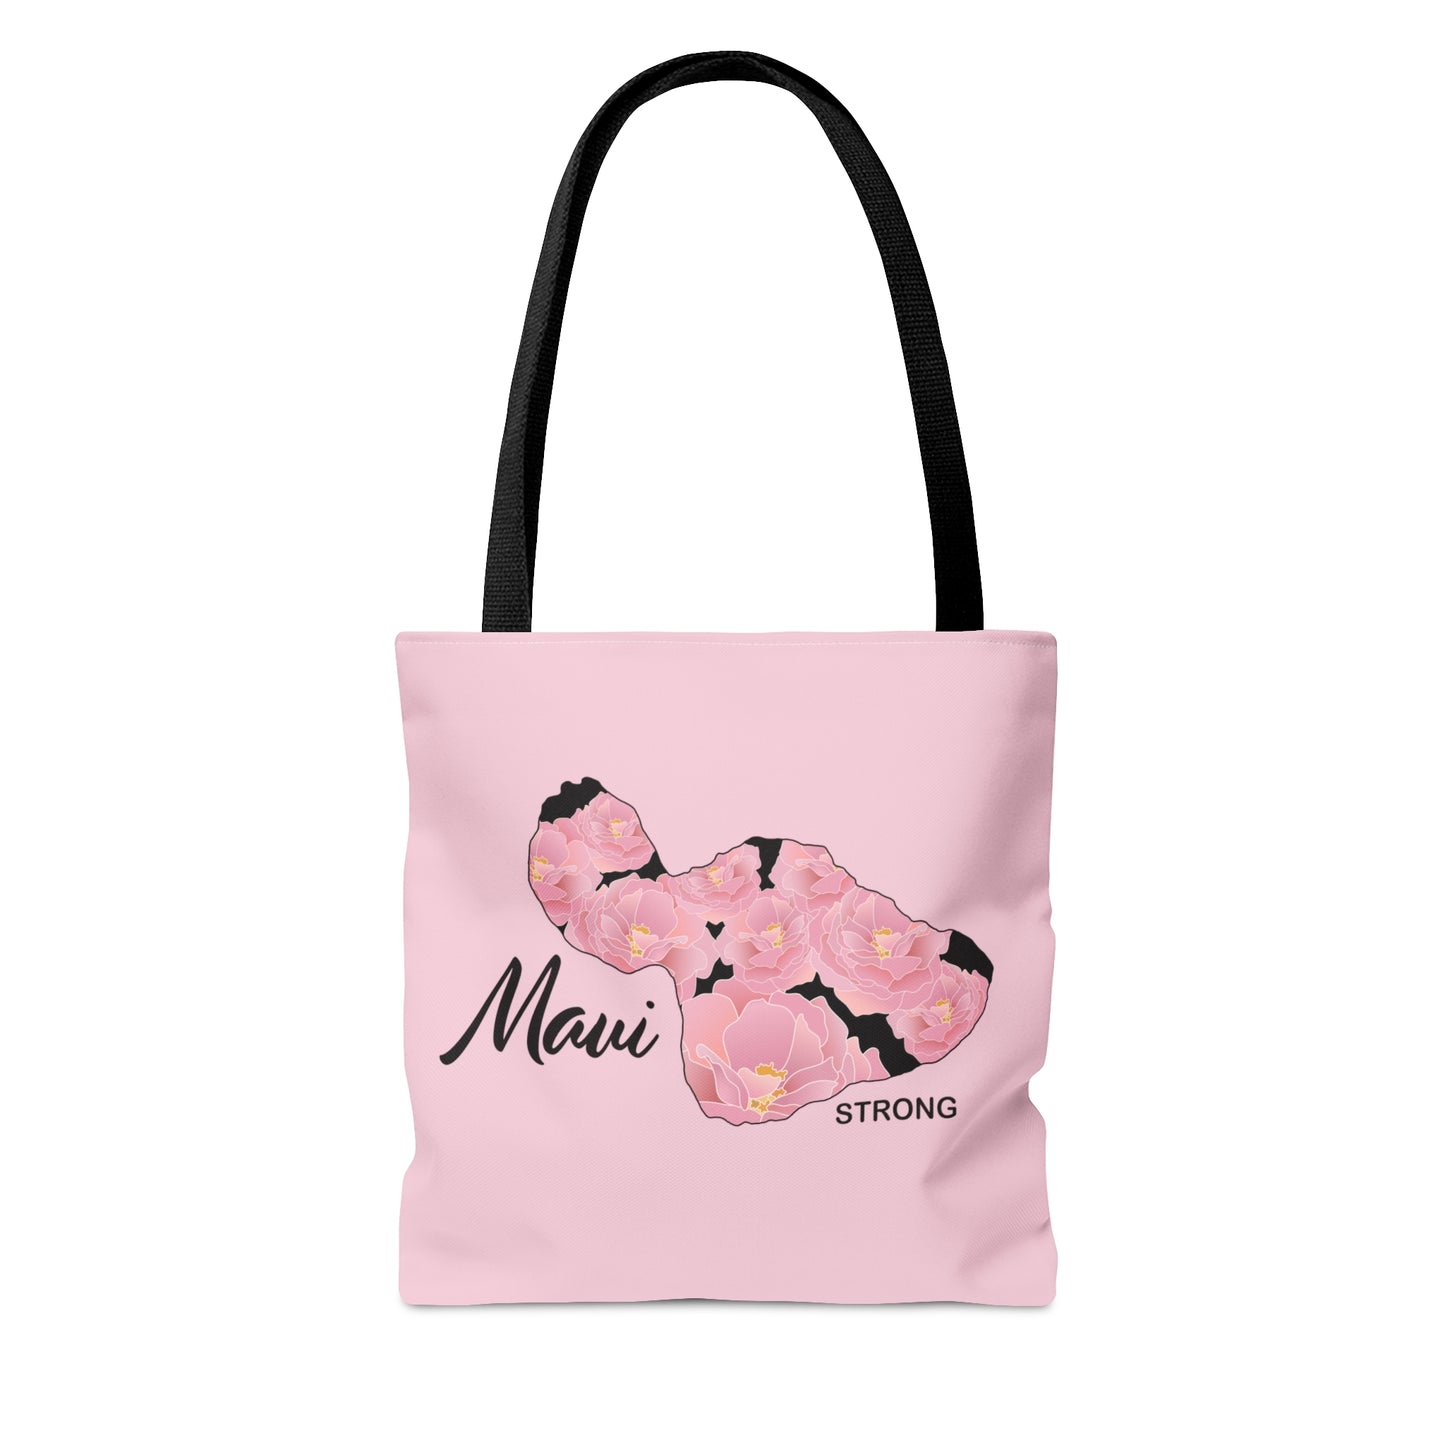 Tote bag- Maui Strong Lokelani Island Pink and Black, Proceeds Donated for Lahaina Wildfire Relief